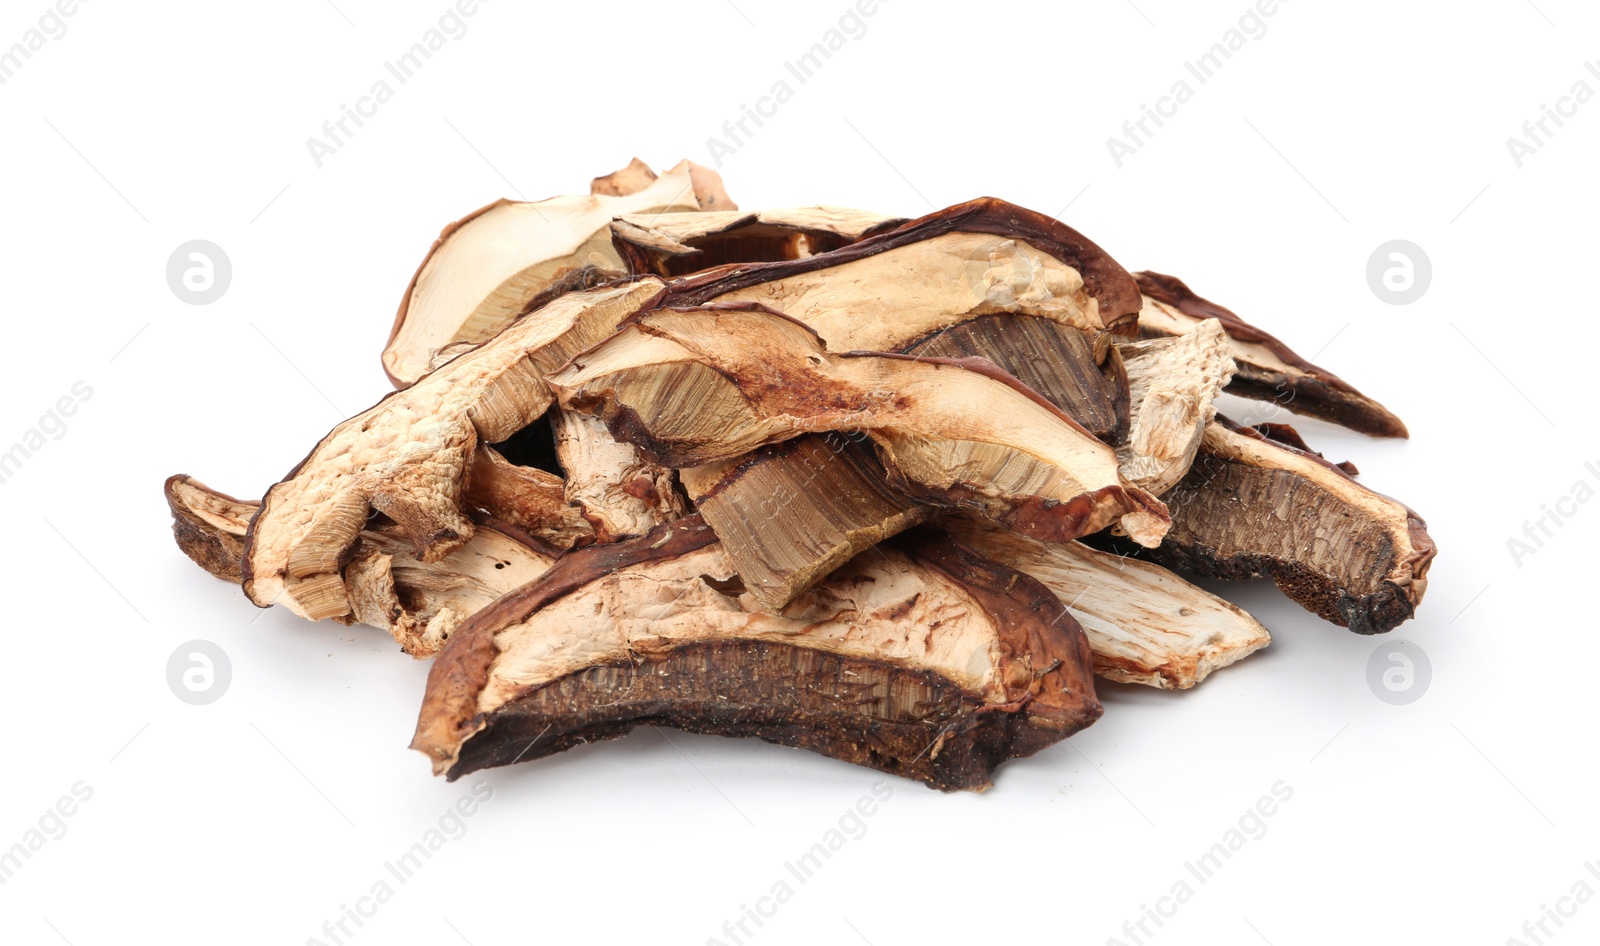 Photo of Slices of dried mushrooms on white background